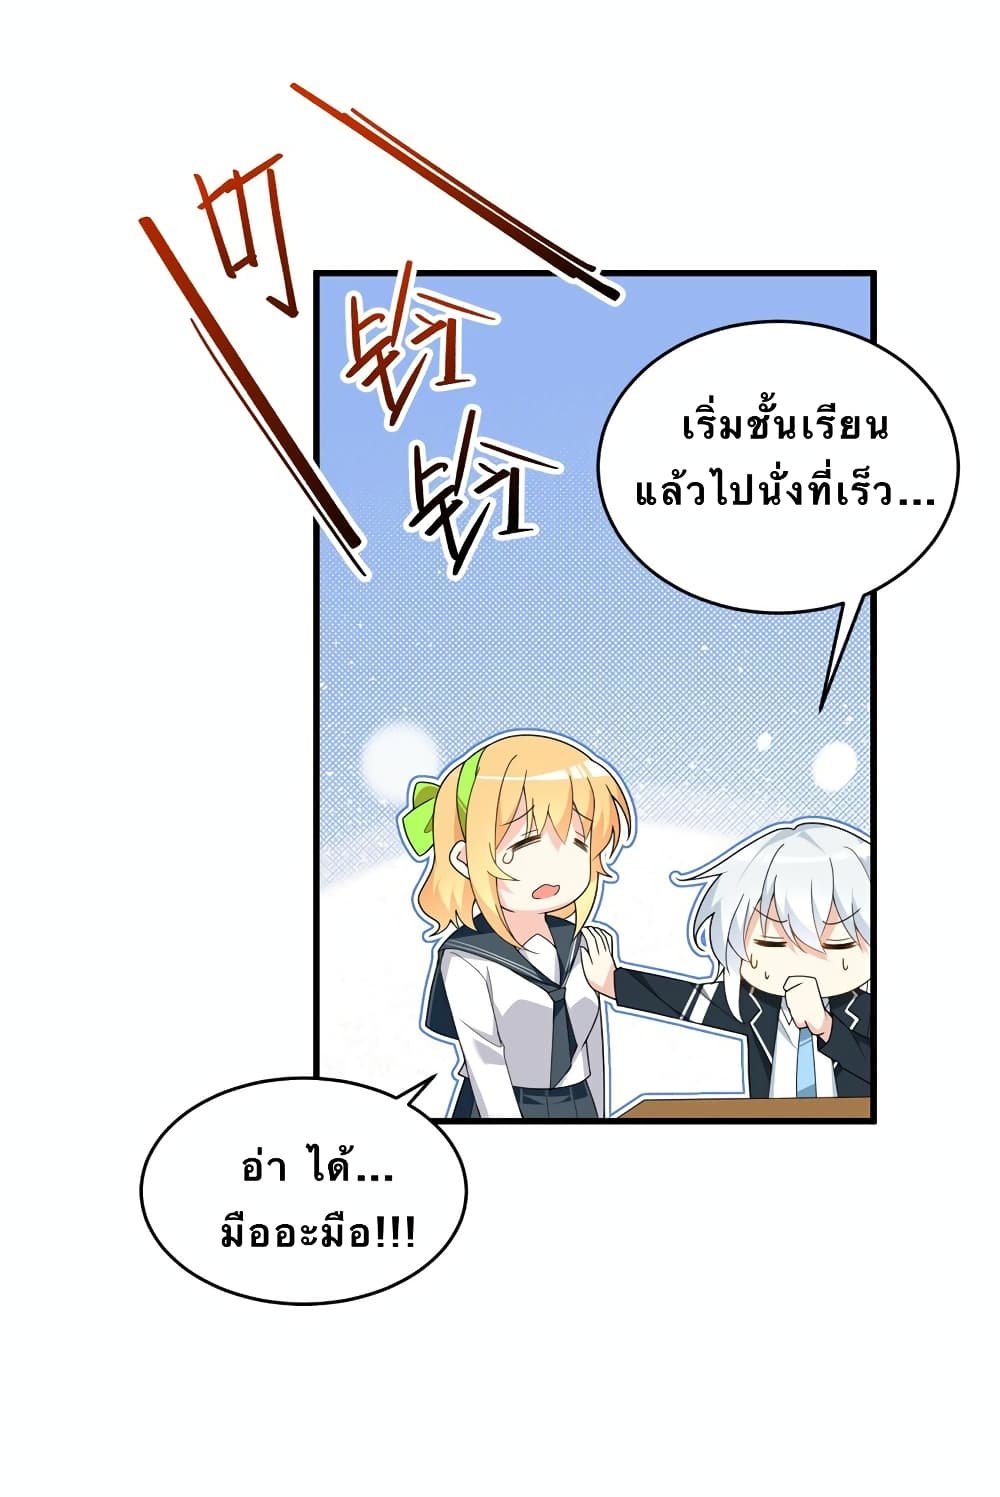 I Eat Soft Rice in Another World 4-4